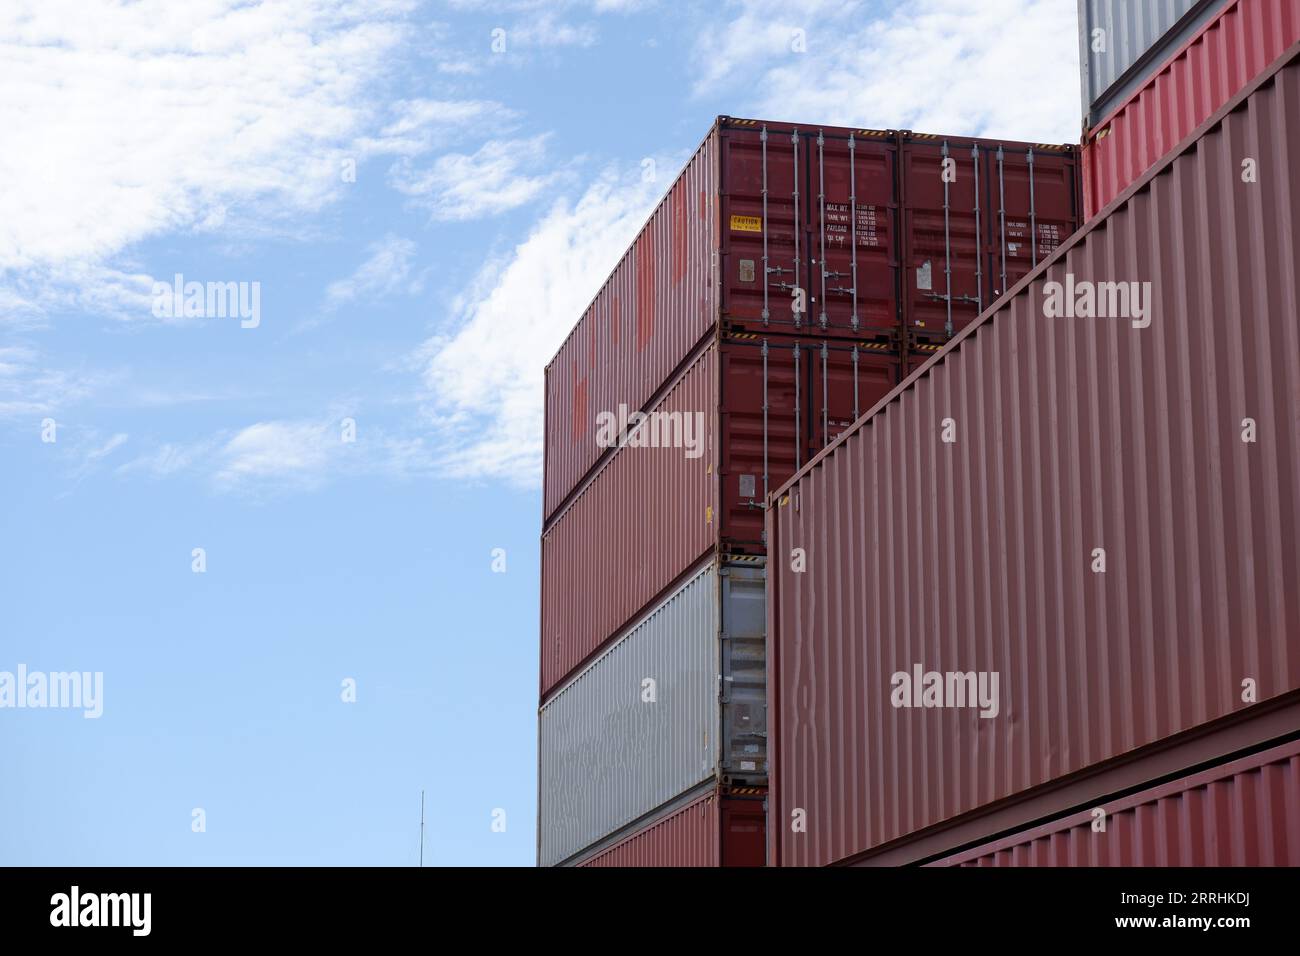 Logistics transportation of international container shipping and cargo planes in container yards, freight transport, international global transportati Stock Photo